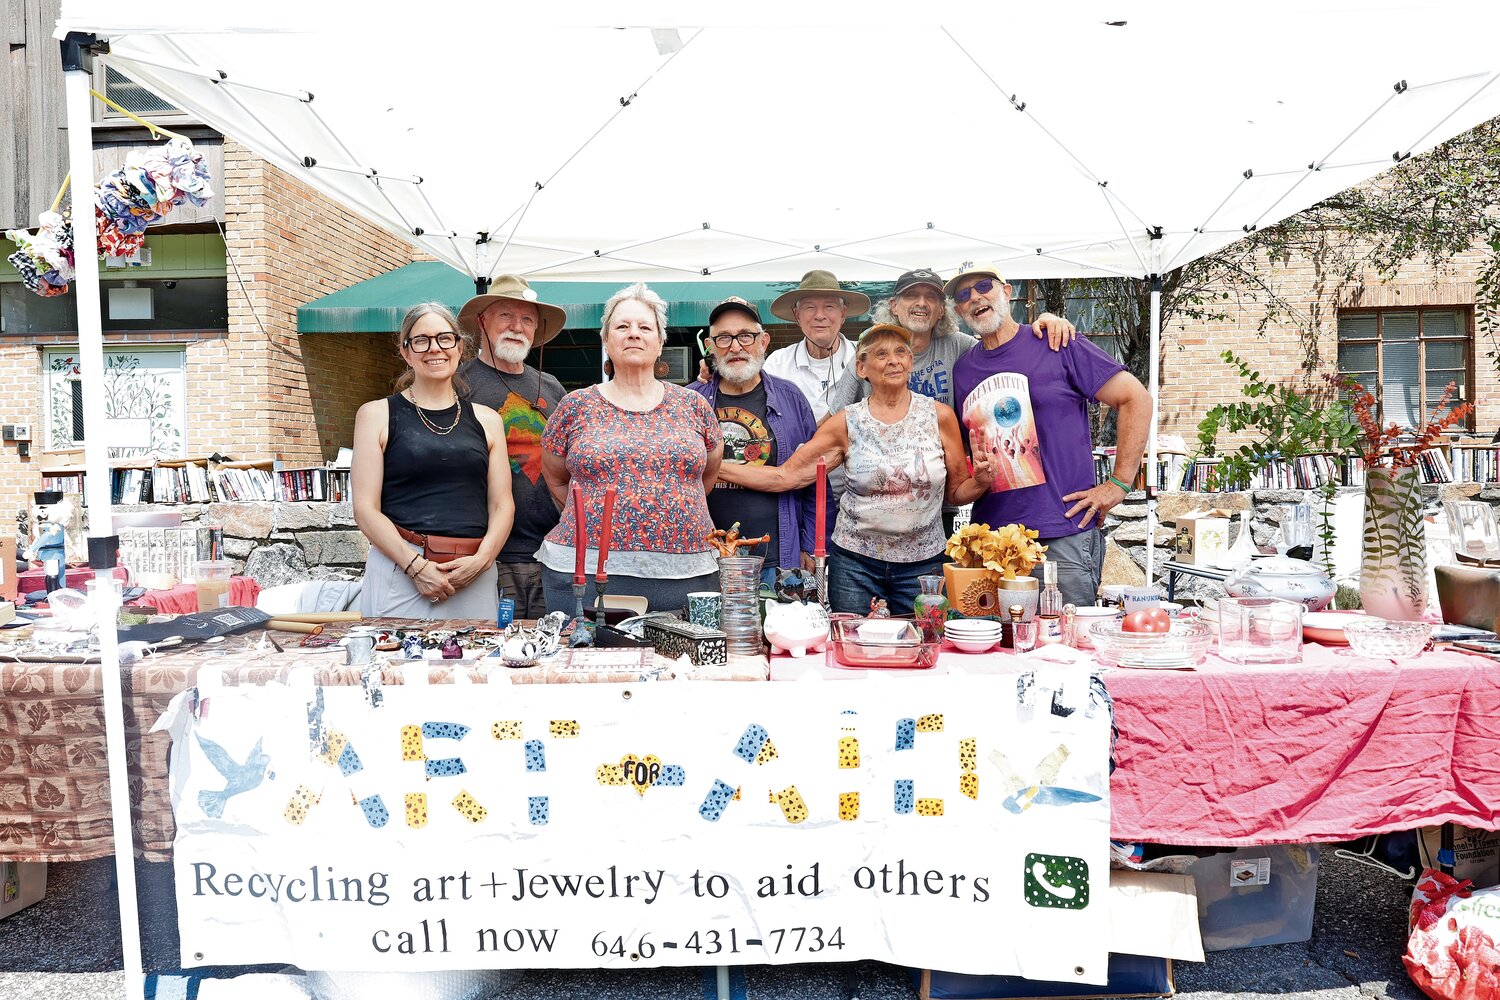 The members of Art for AID work the Sunday Market. The group dedicates its efforts to taking in odds and ends and using the proceeds to raise money for local causes. Richard Feldman is an active participant.